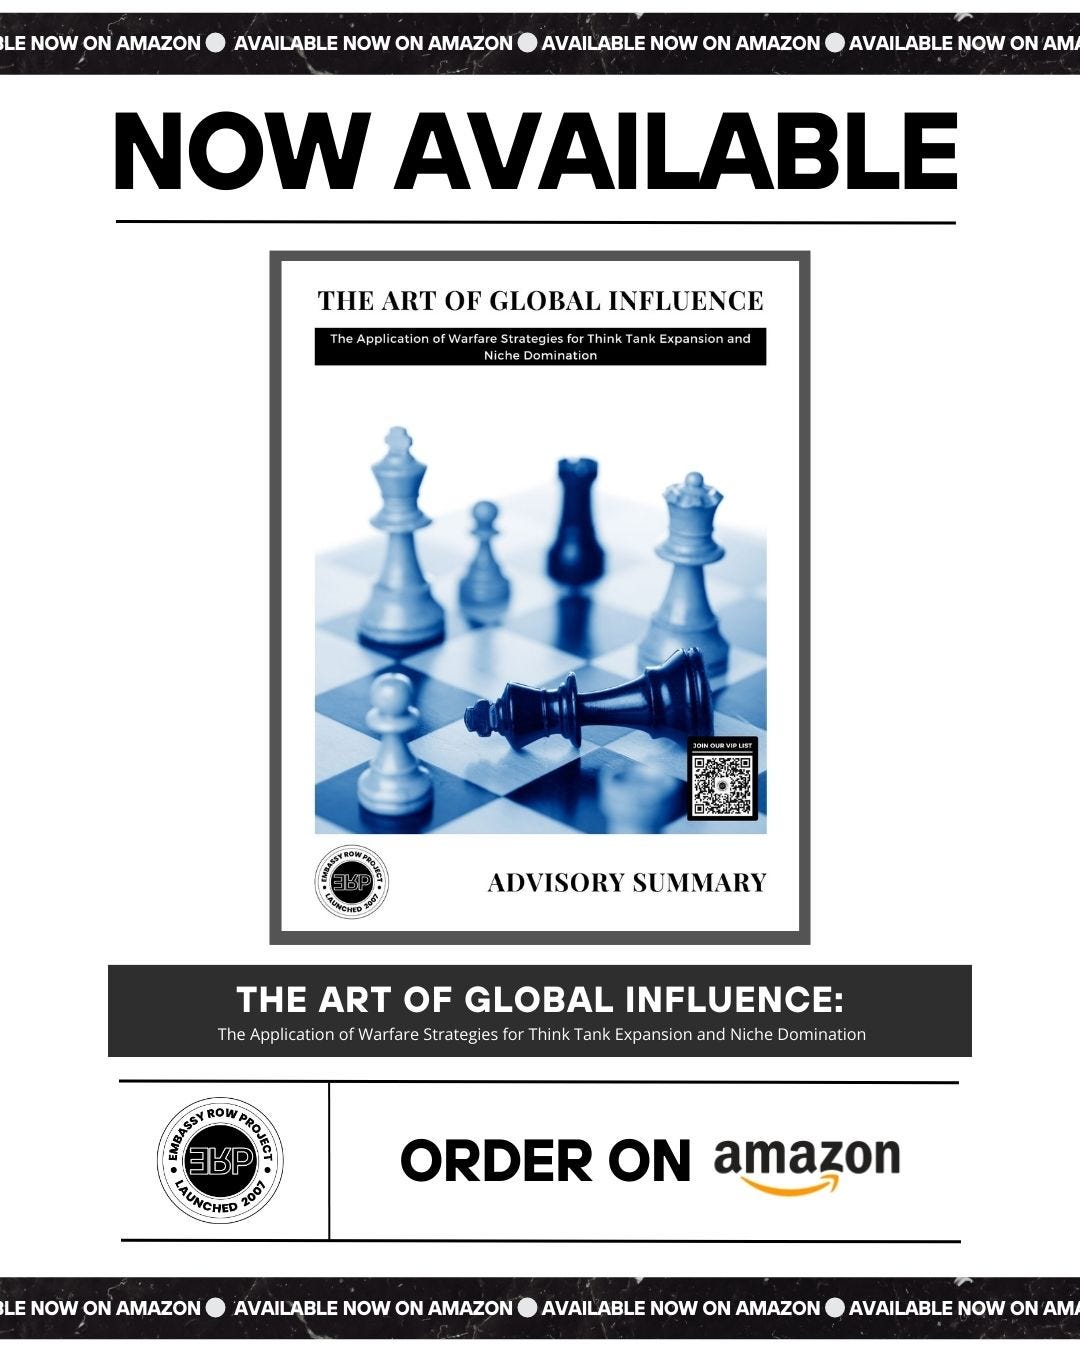 The Art of Global Influence: The Application of Warfare Strategies for  Think Tank Expansion and Niche Domination” book is now available on Amazon  | by Emancip8 Project | Medium